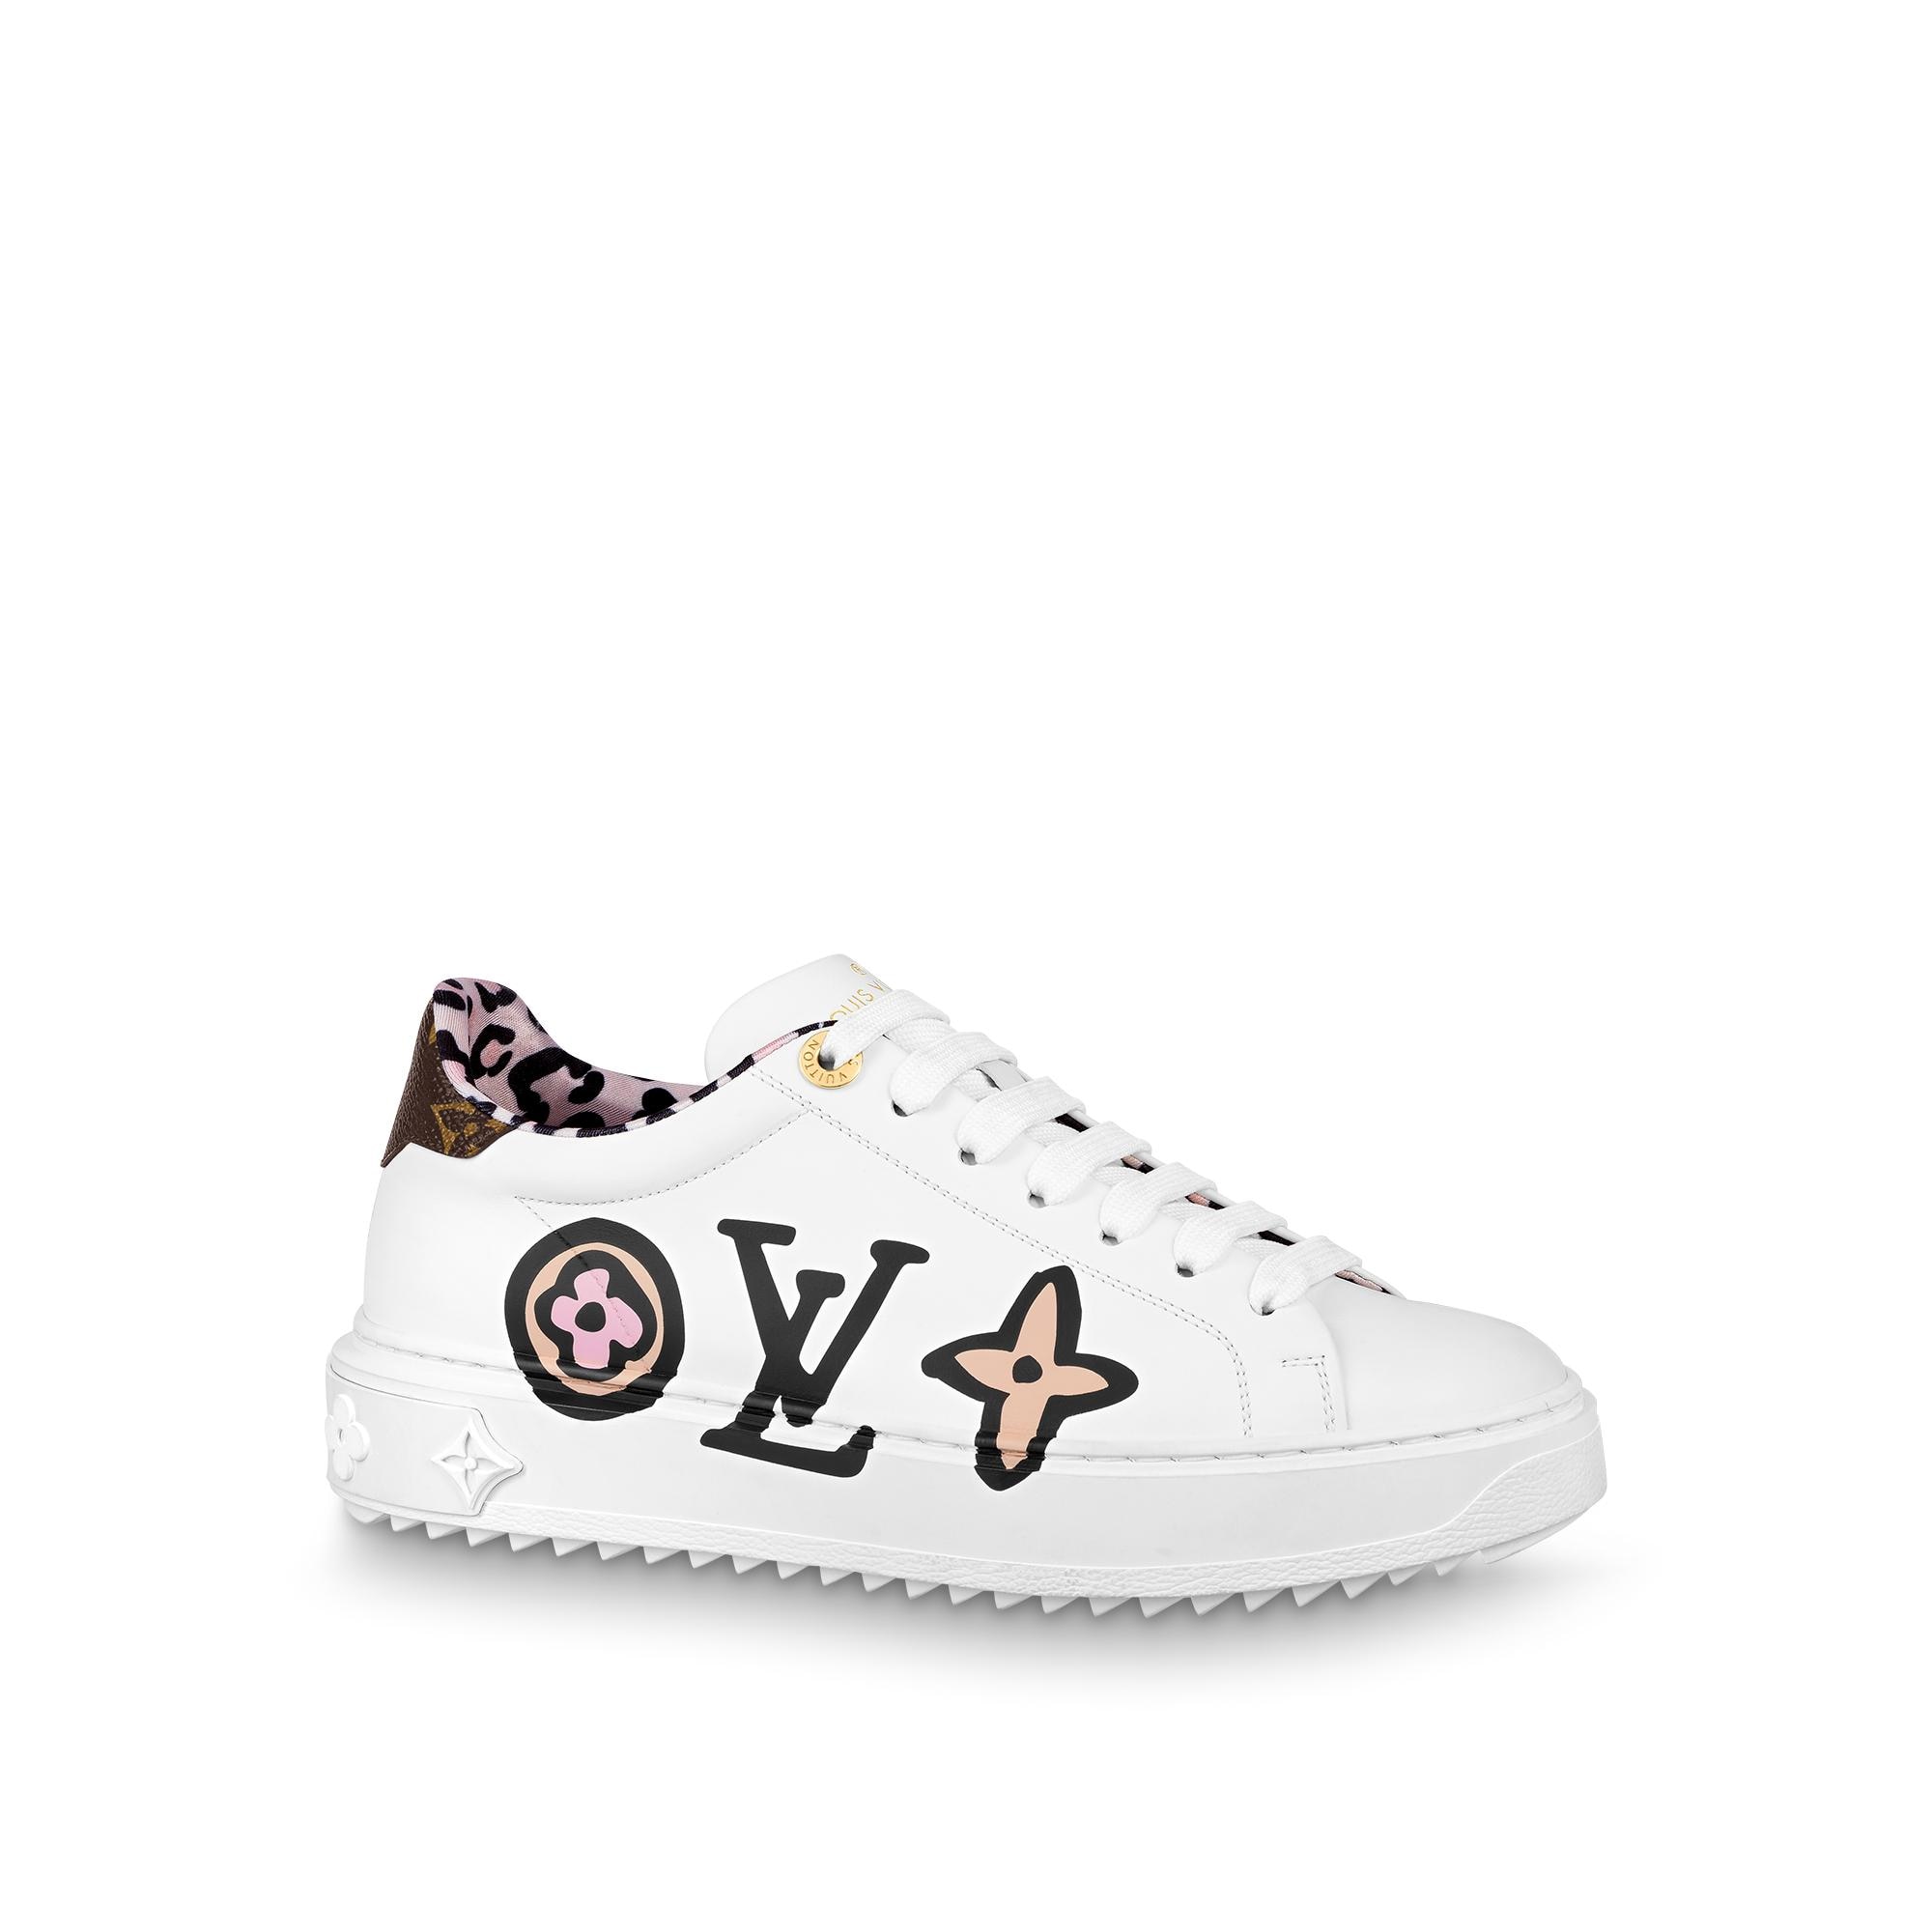 Louis Vuitton Time Out Sneaker in White - Shoes 1A93XD - $140.40 